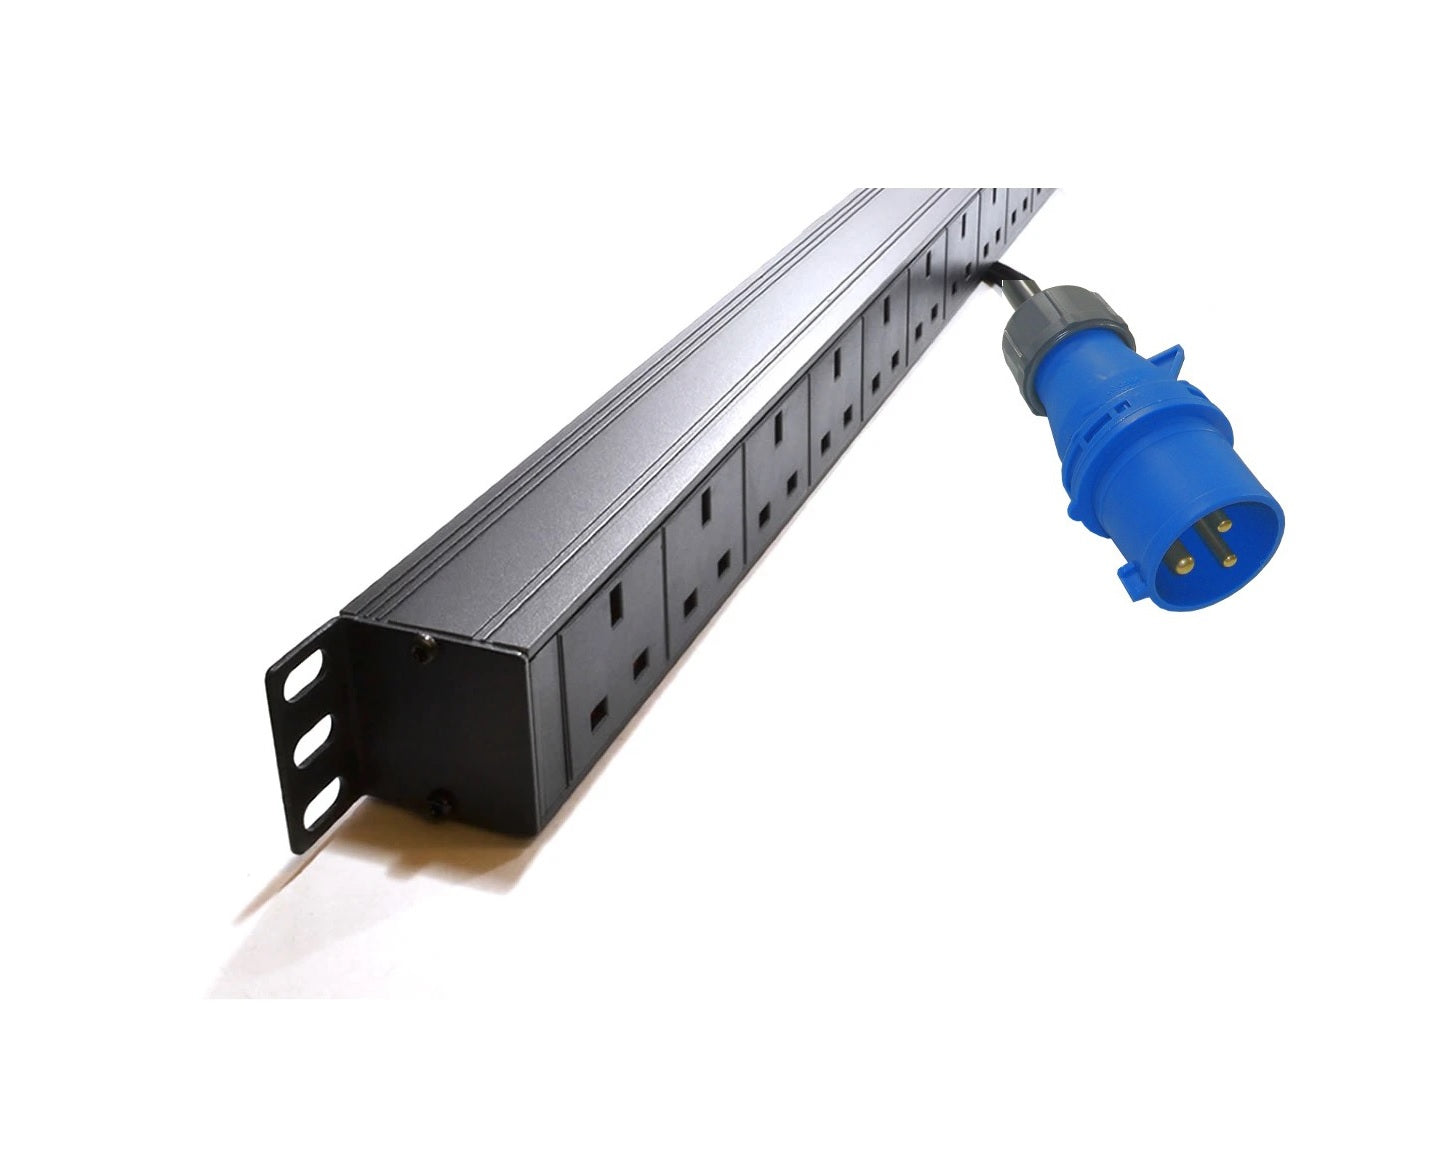 1U 19" 10 Way Switched Vertical 13A UK Sockets to 32A Commando Plug (Rackmount)